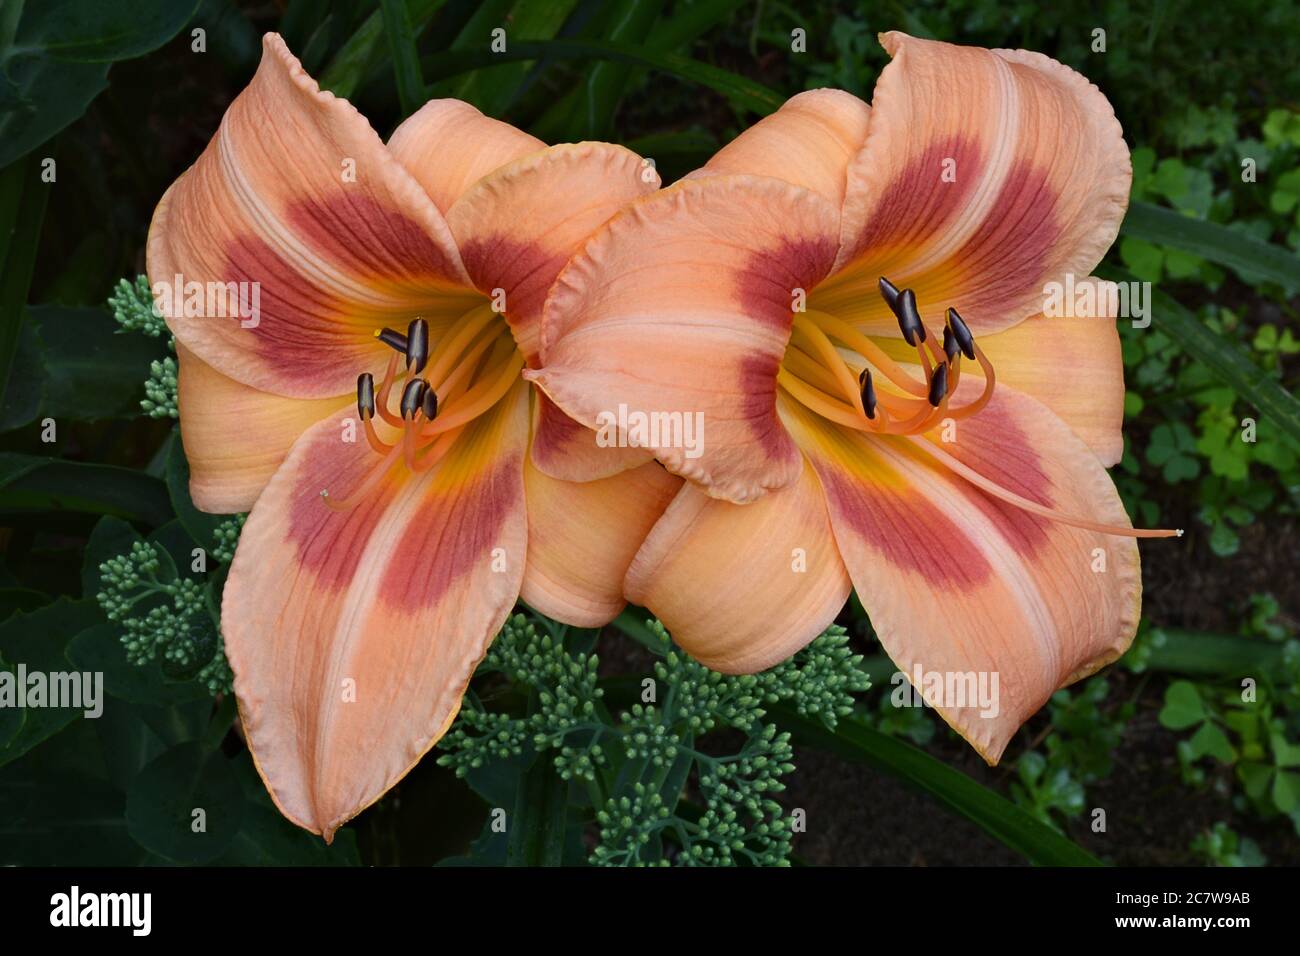 Closeup of two vibrant peach and rose colored daylily blossoms (Hemerocallis 'Real Wind'). Pistol and stamens extend out from yellow throat. Stock Photo